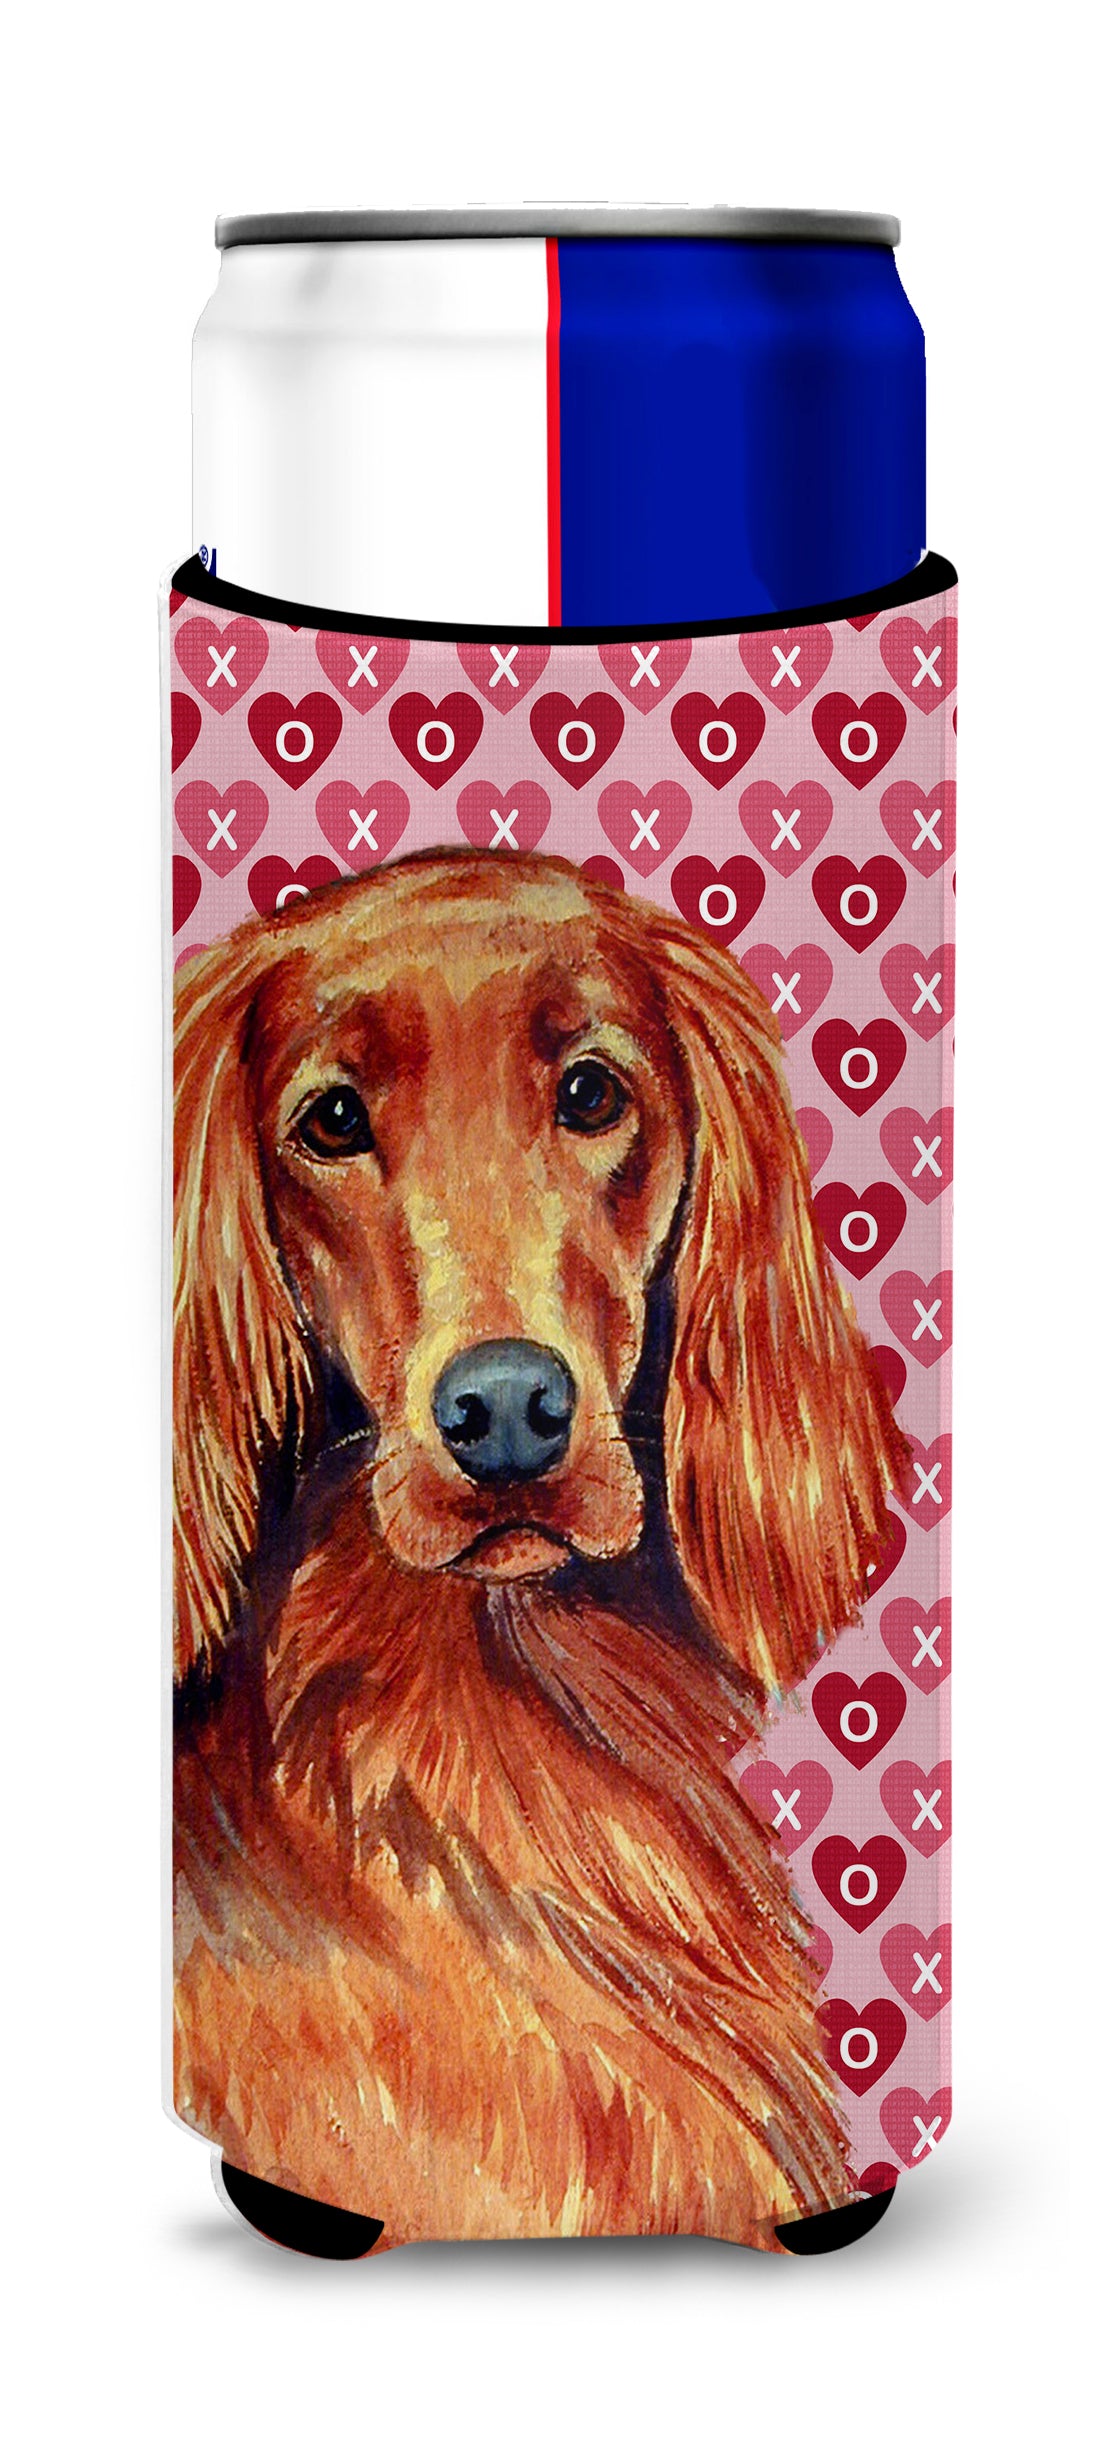 Irish Setter Hearts Love and Valentine's Day Portrait Ultra Beverage Insulators for slim cans LH9164MUK.